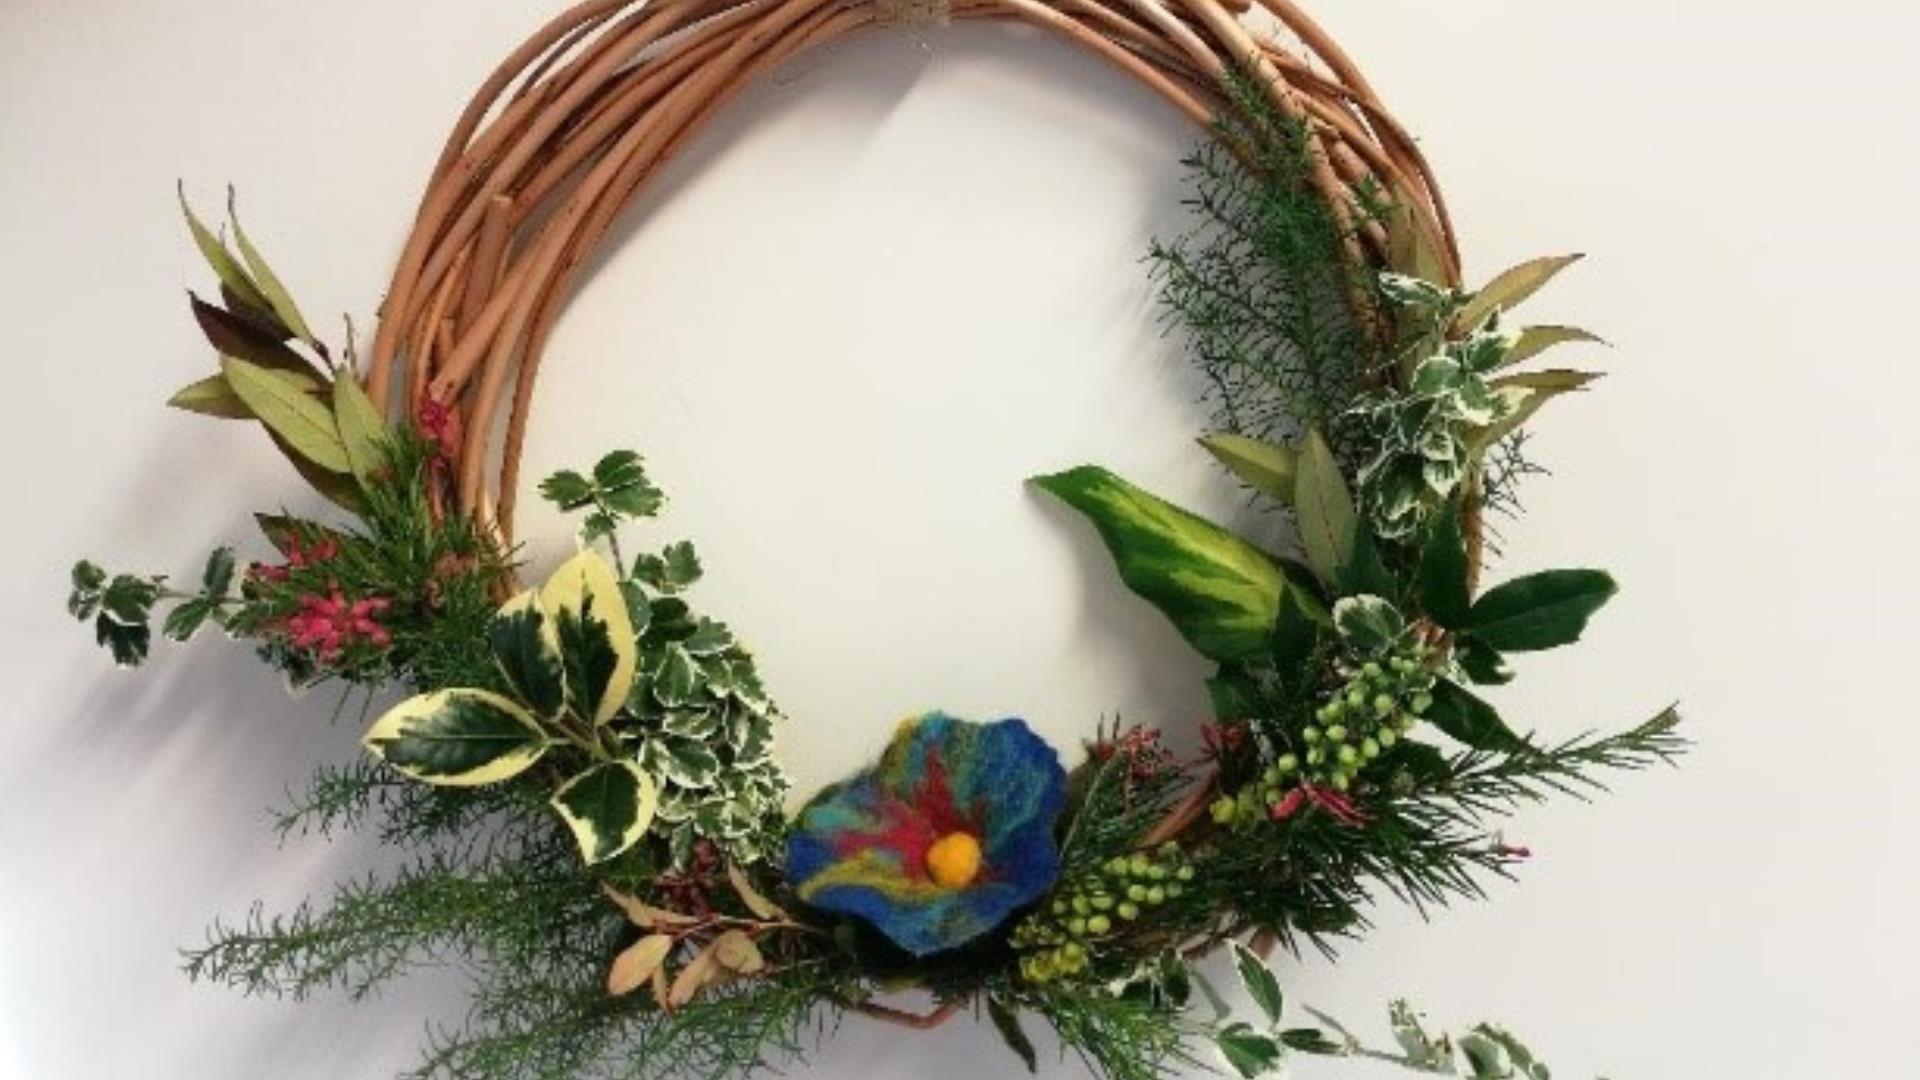 Image of a willow wreath with greenery